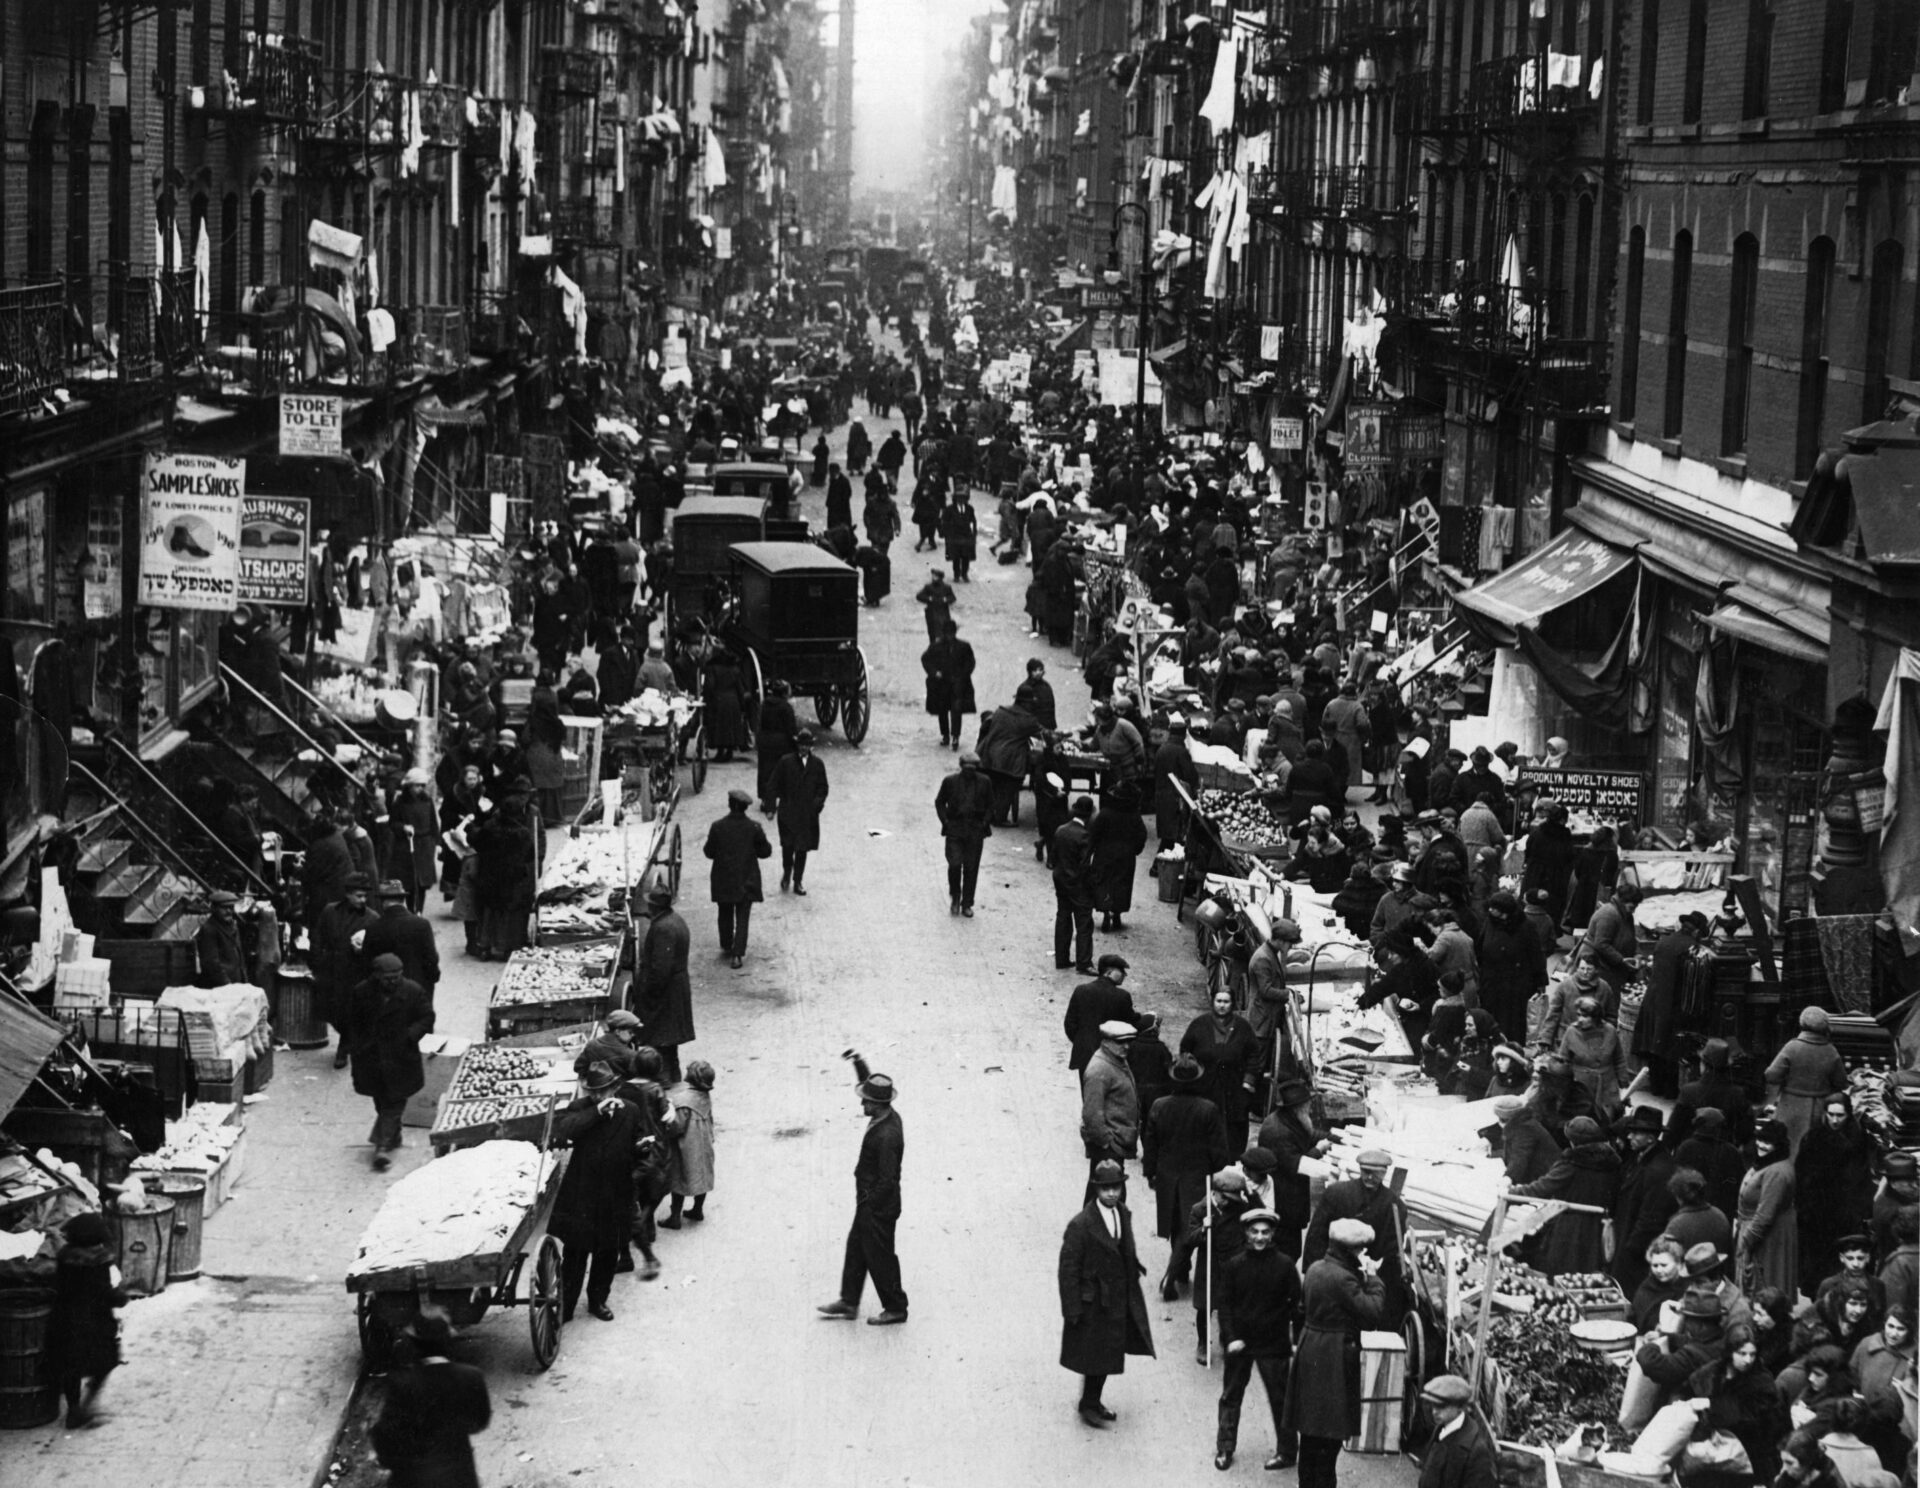 The Shameful History of Ghettos: From Oppression to Opportunity